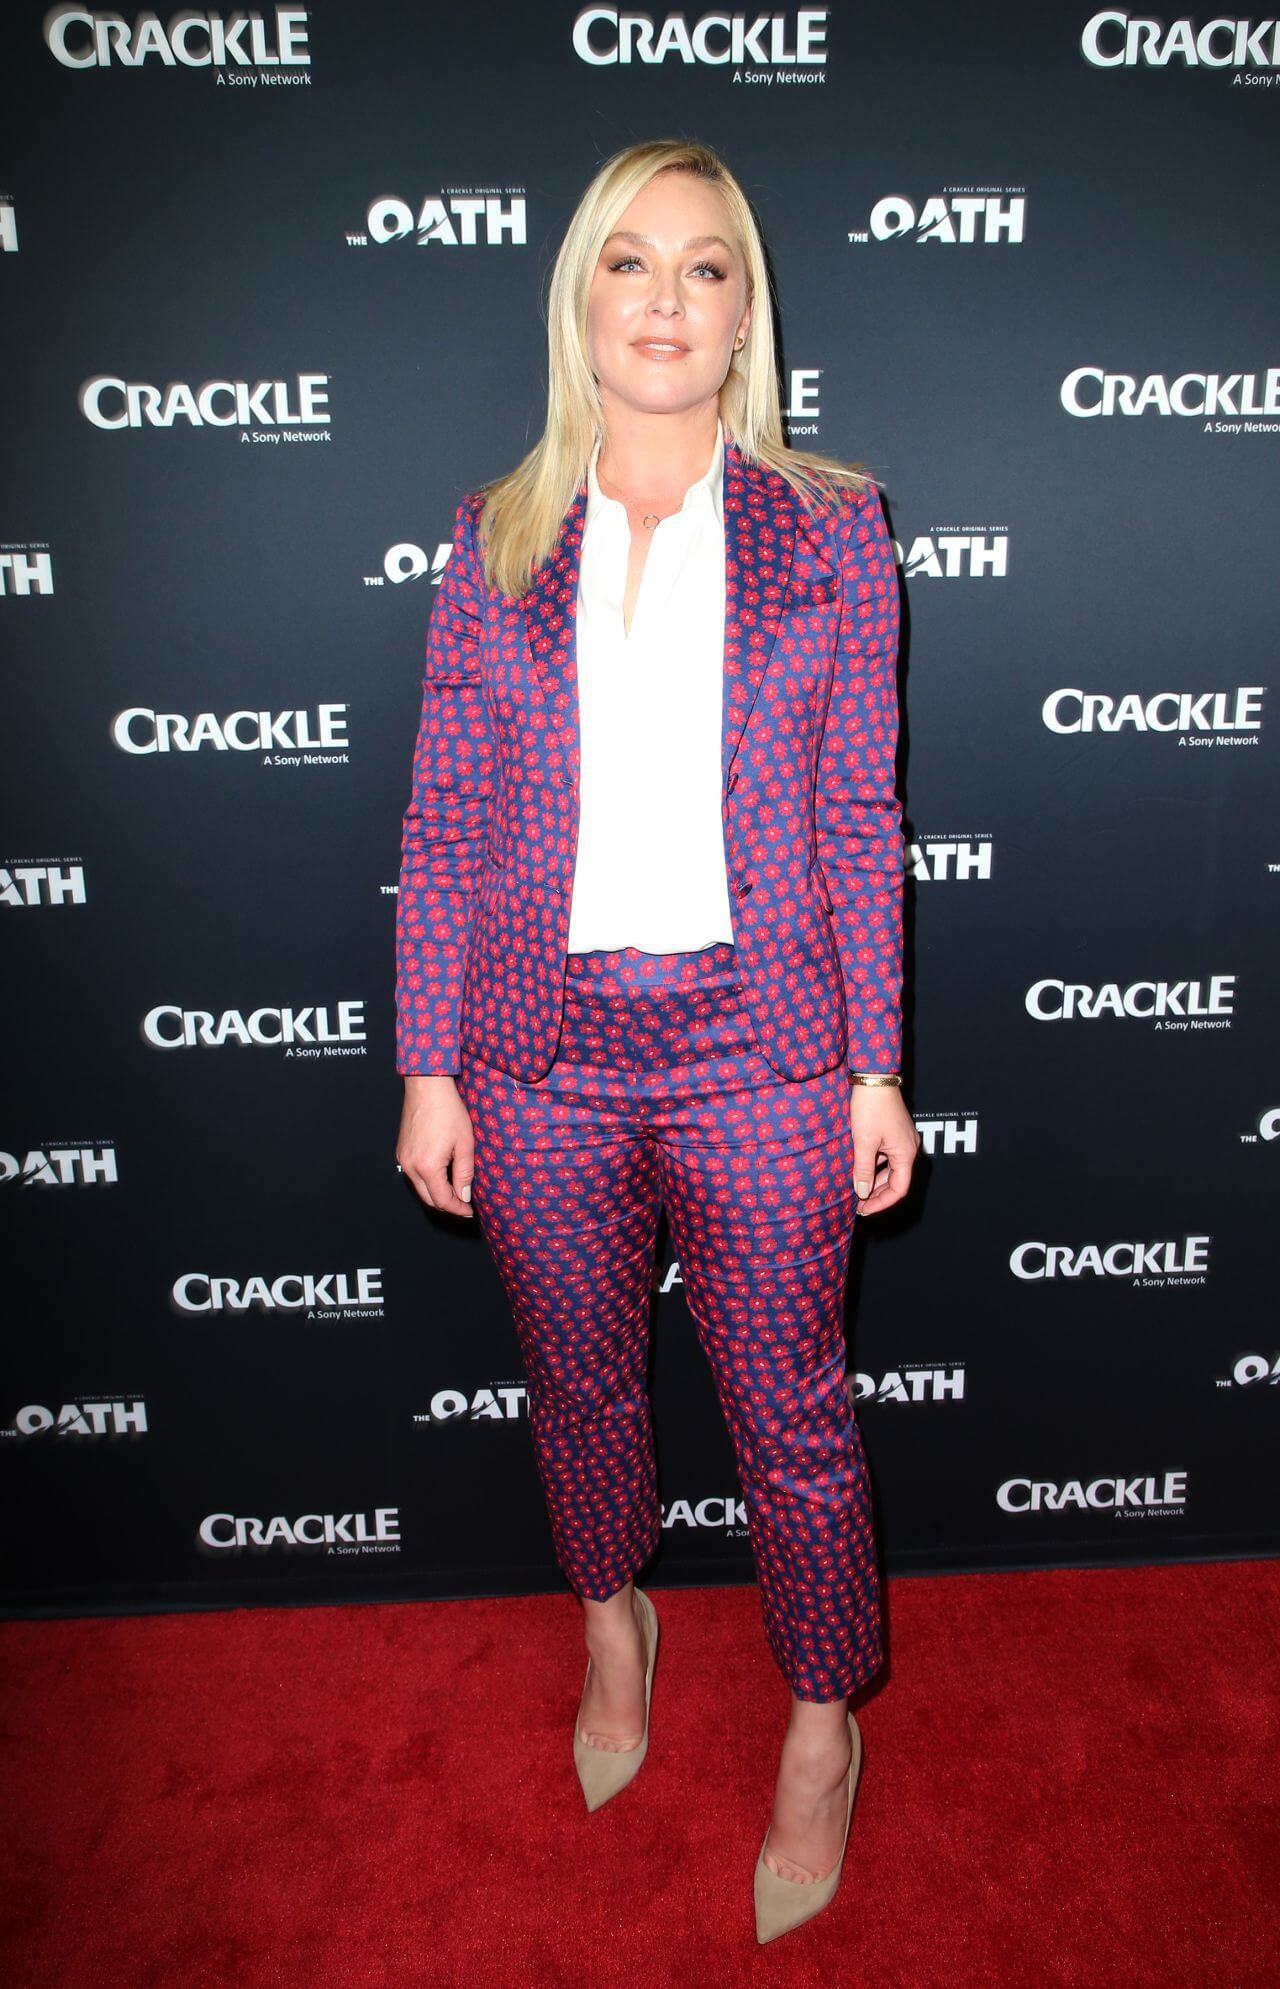 Elisabeth Rohm In Printed Blazer And Pants With White Top